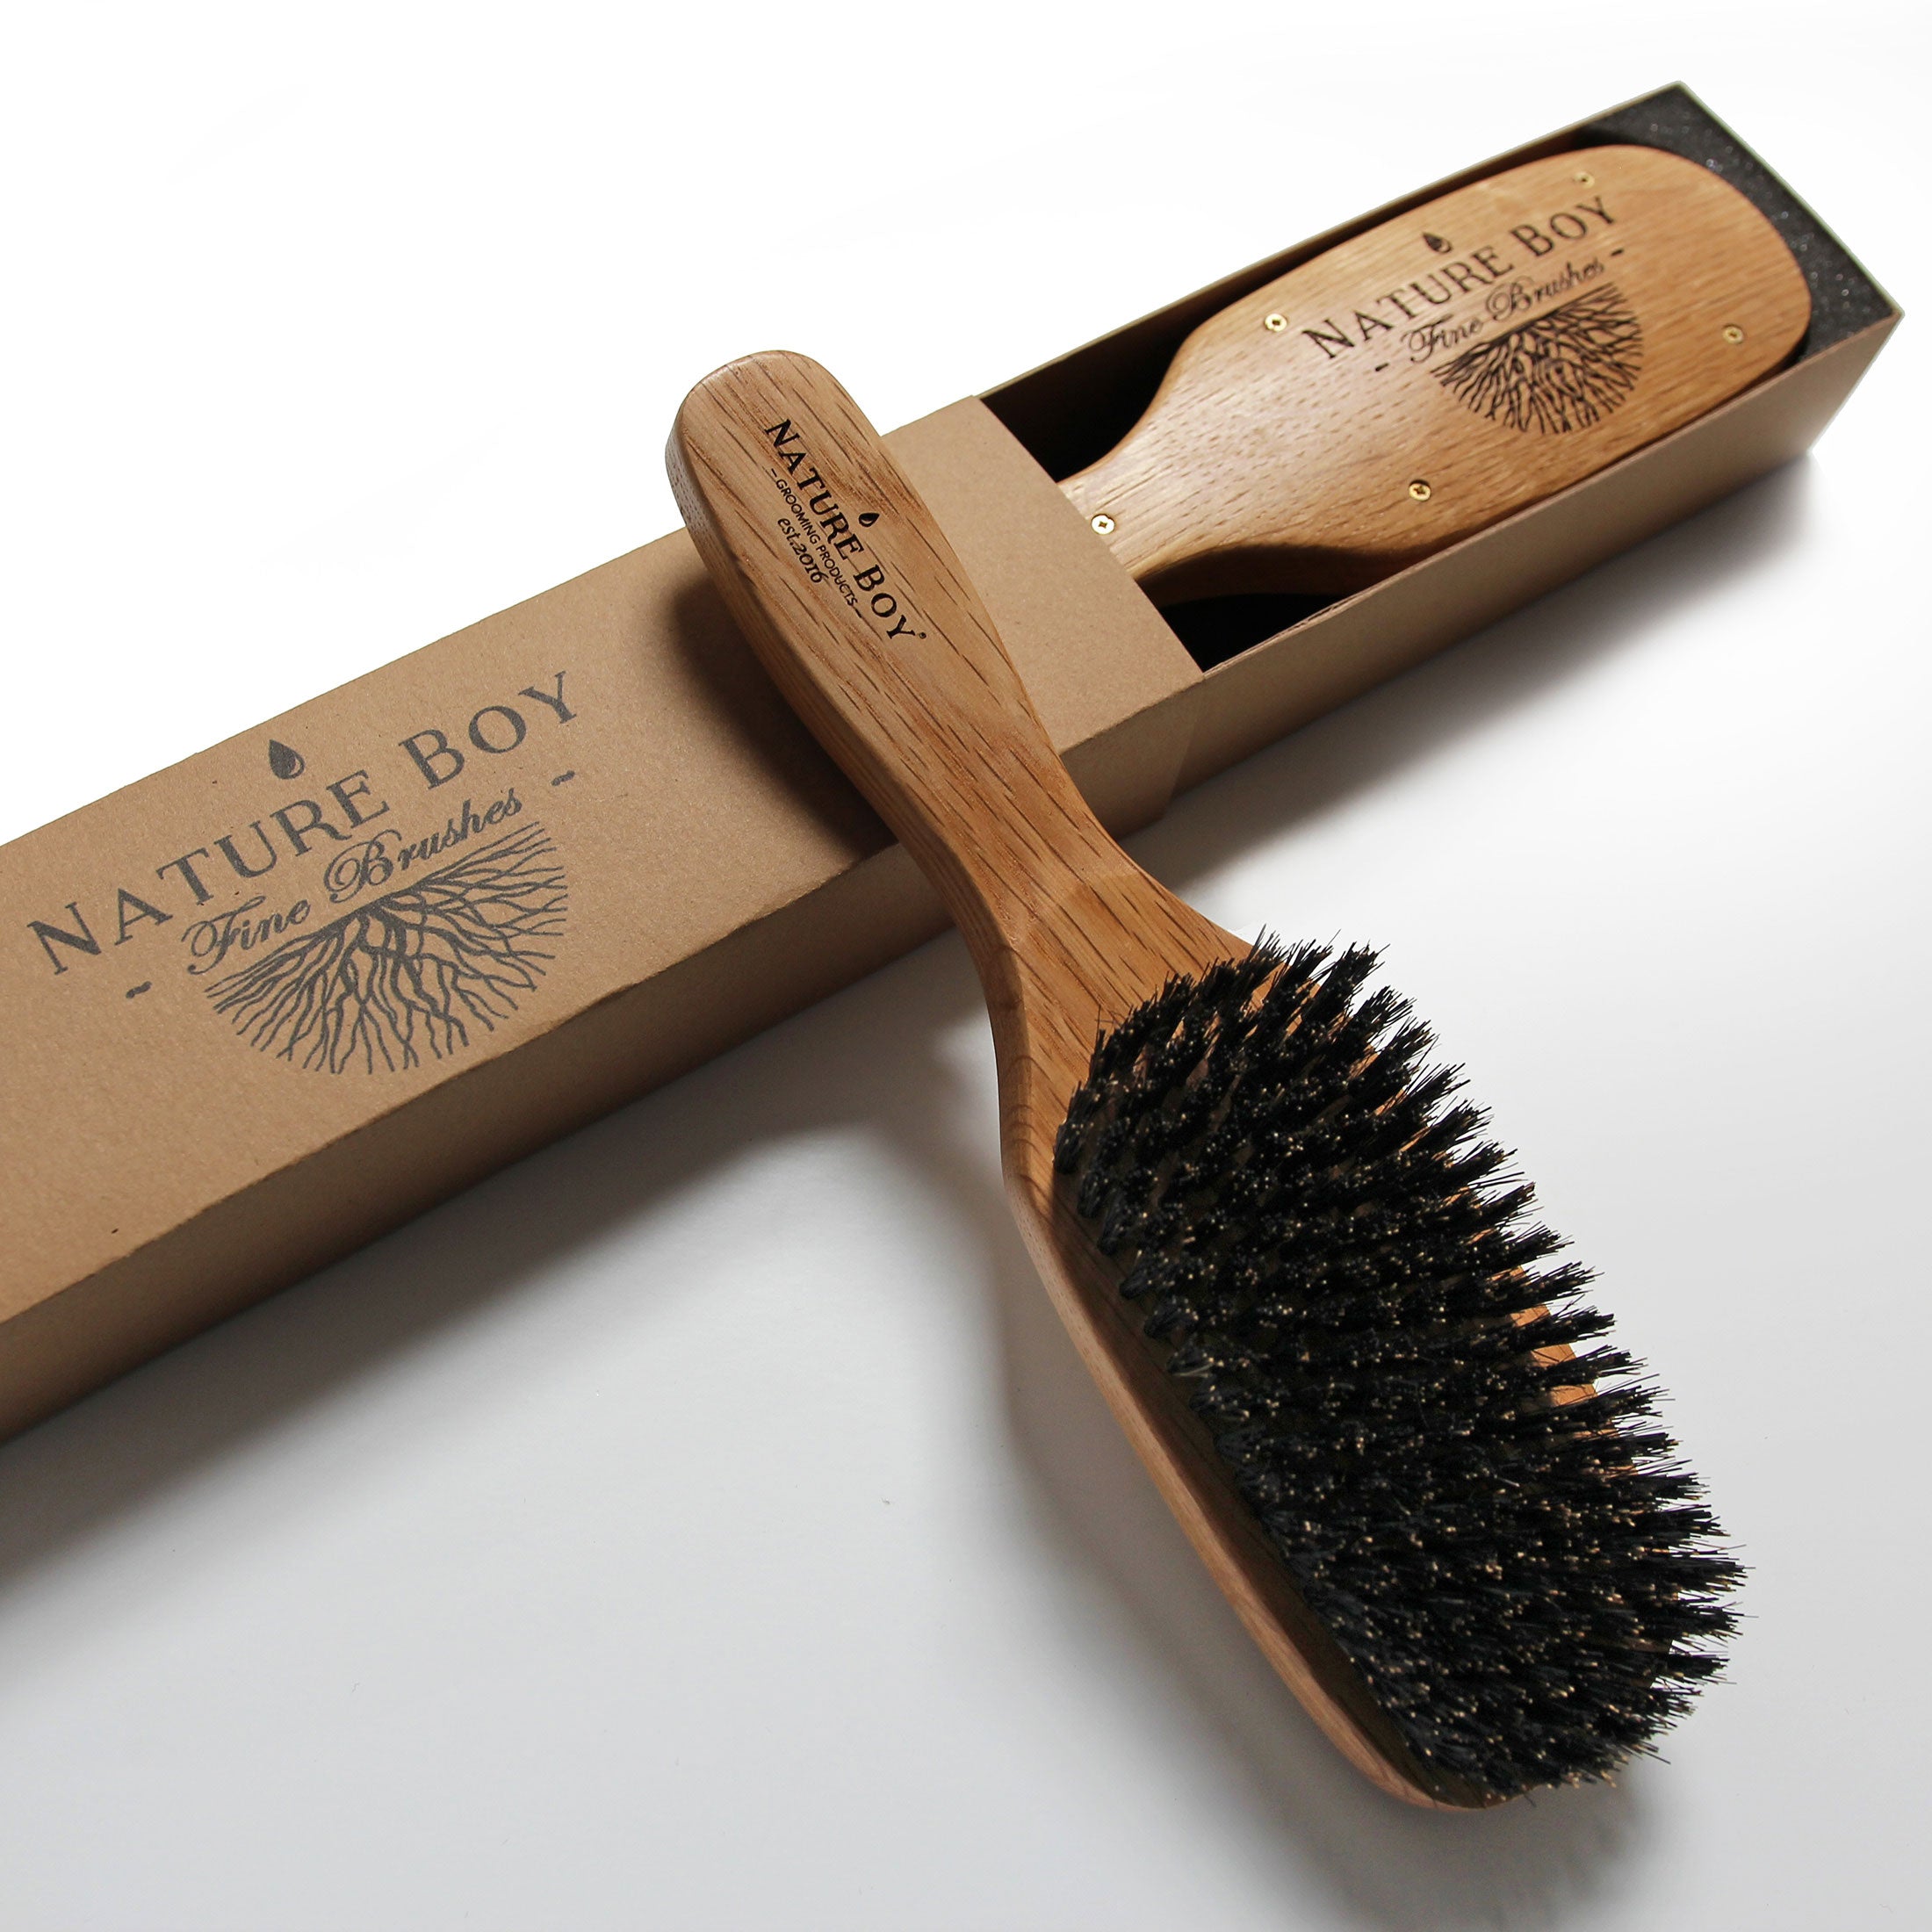 nature boy grooming products long handle boar bristle hair wave brush firm oak wood 100% natural 2